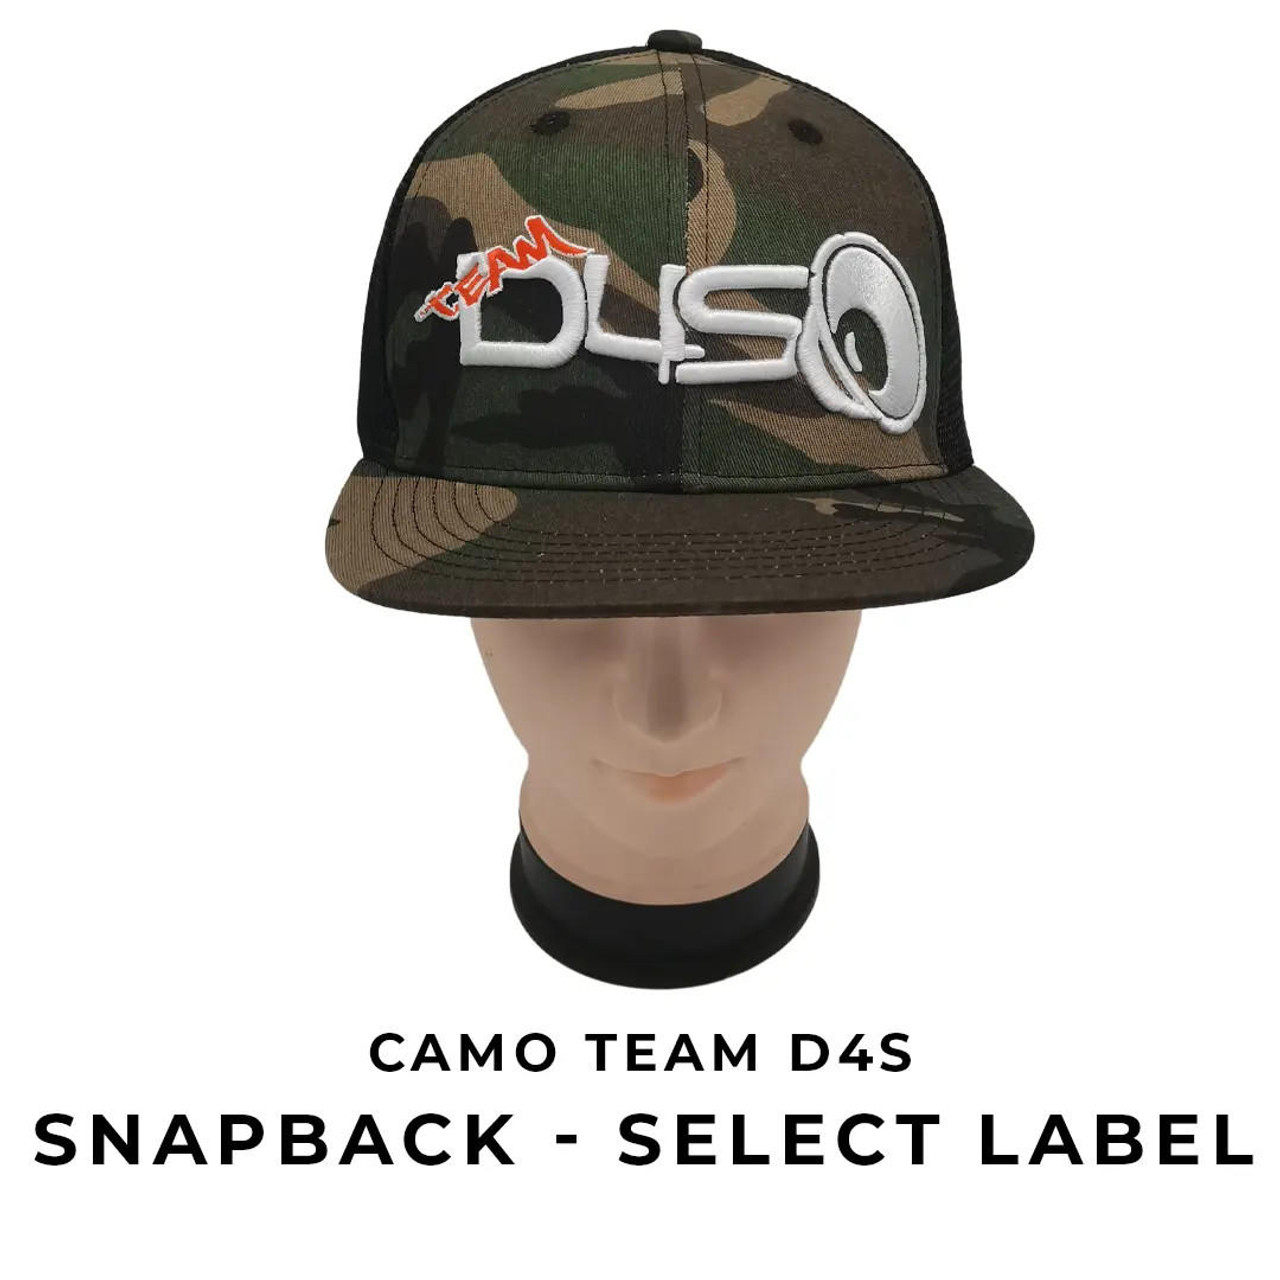 TEAM D4S CAMO Select Label SNAP BACK with MESH SLIGHT CURVED BILL